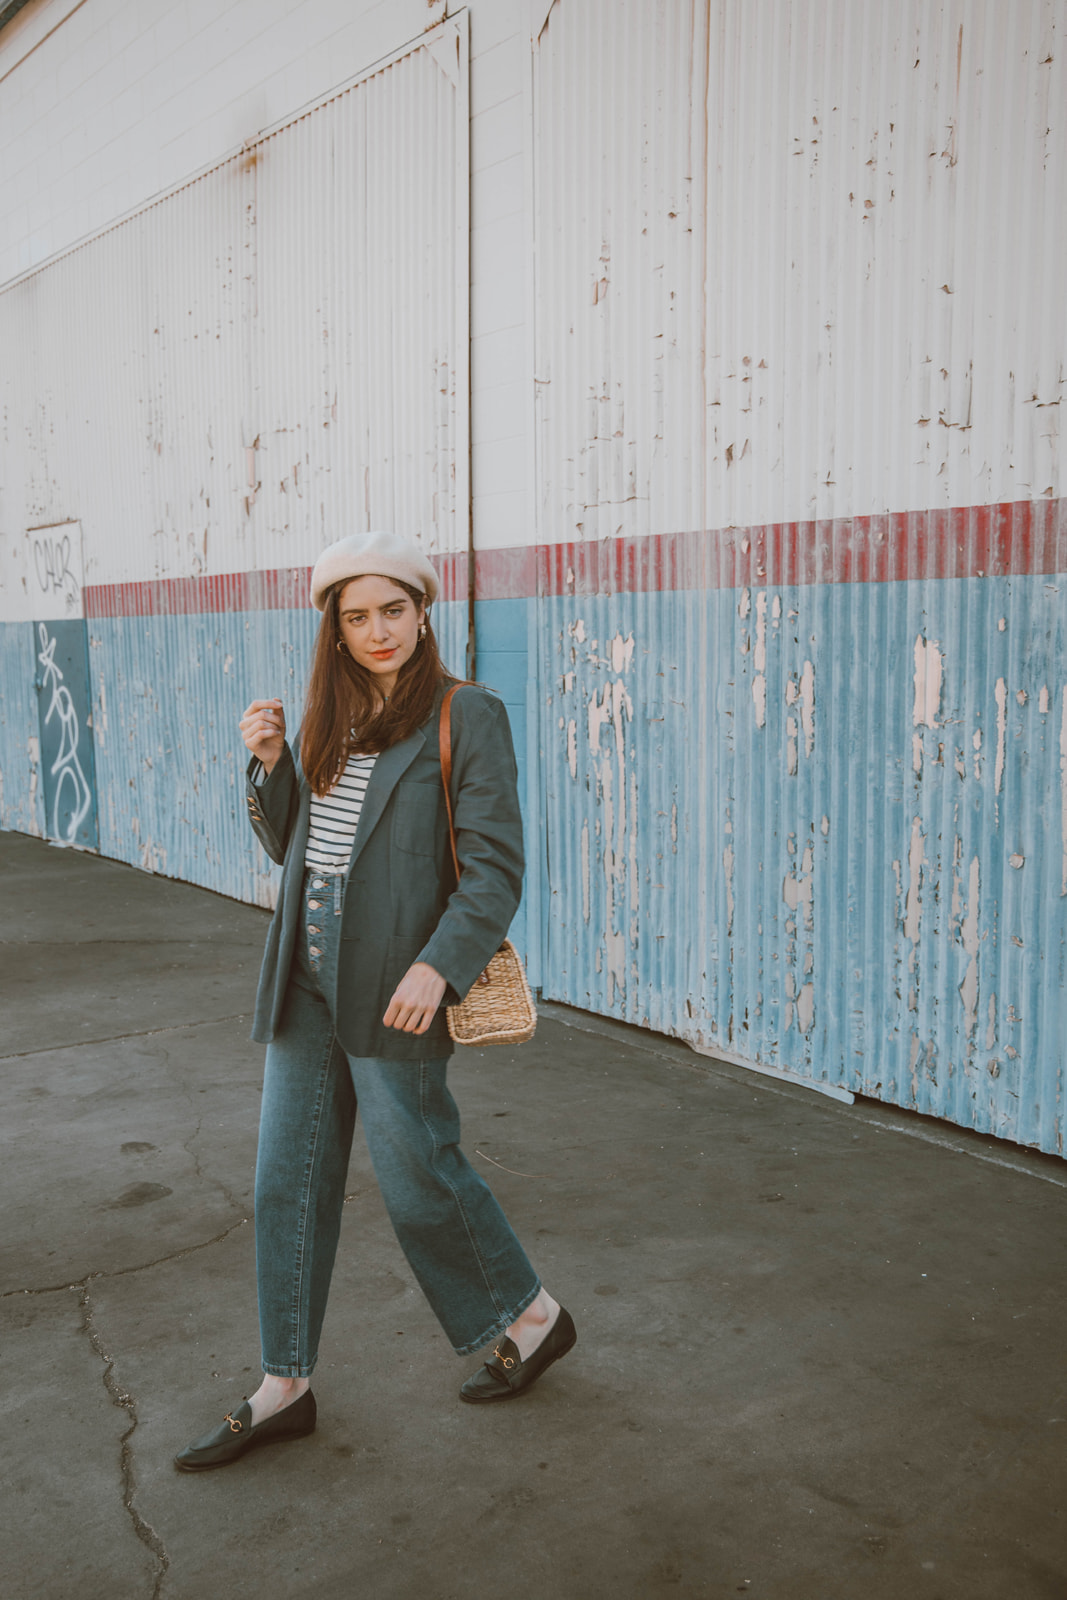 Beret and striped shirt French girl, Parisian chic Pinterest outfit  - Palm Trees and Pellegrino